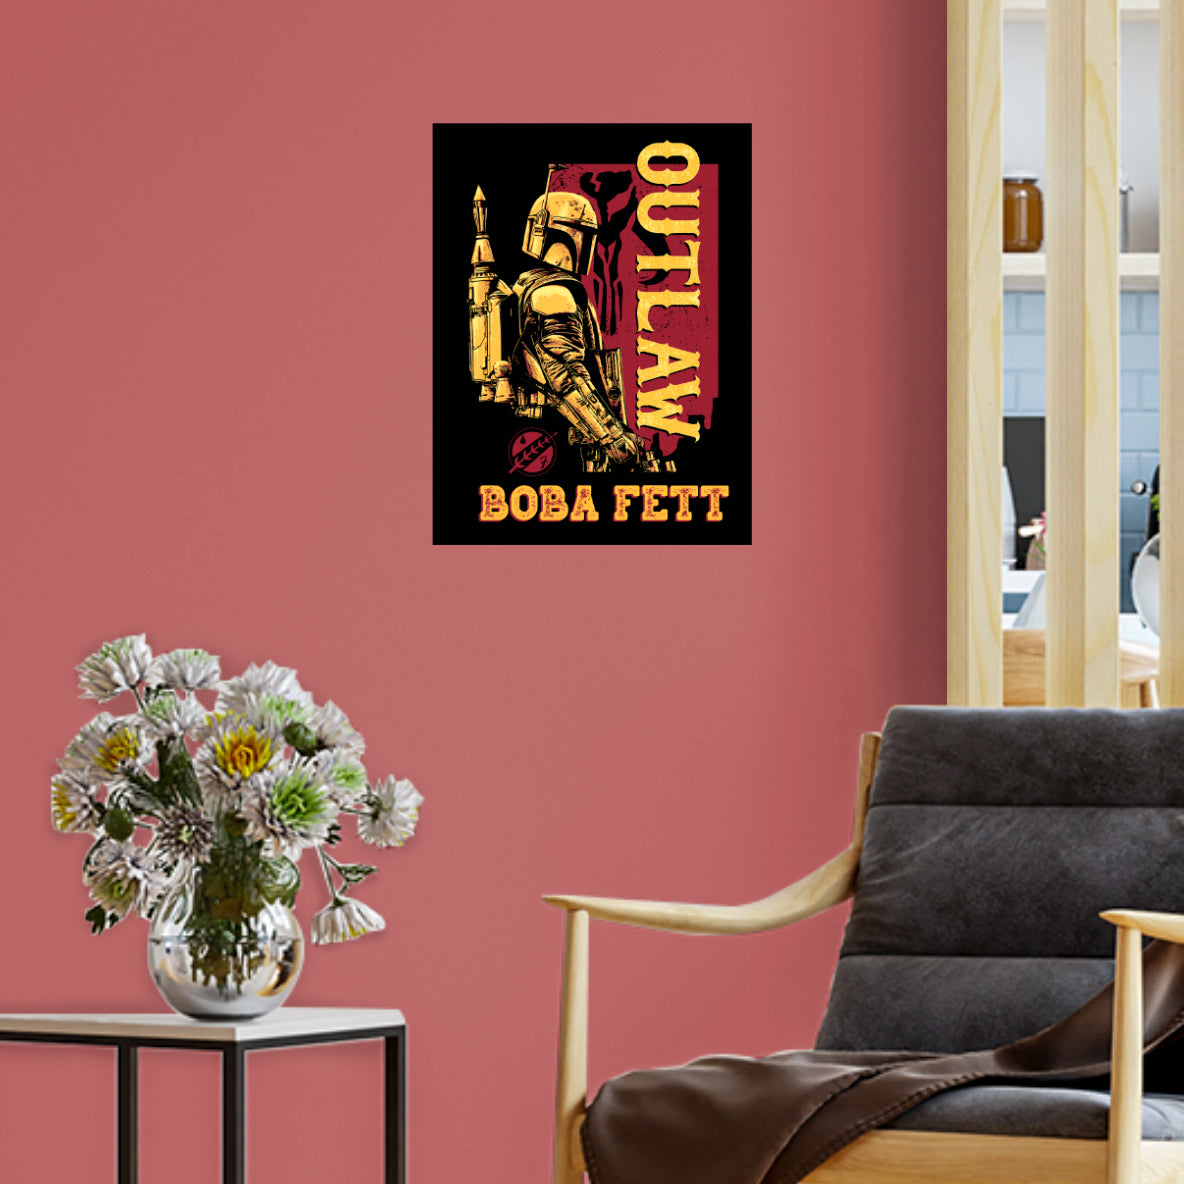 Book of Boba Fett: Boba Fett Outlaw Poster - Officially Licensed Star Wars Removable Adhesive Decal